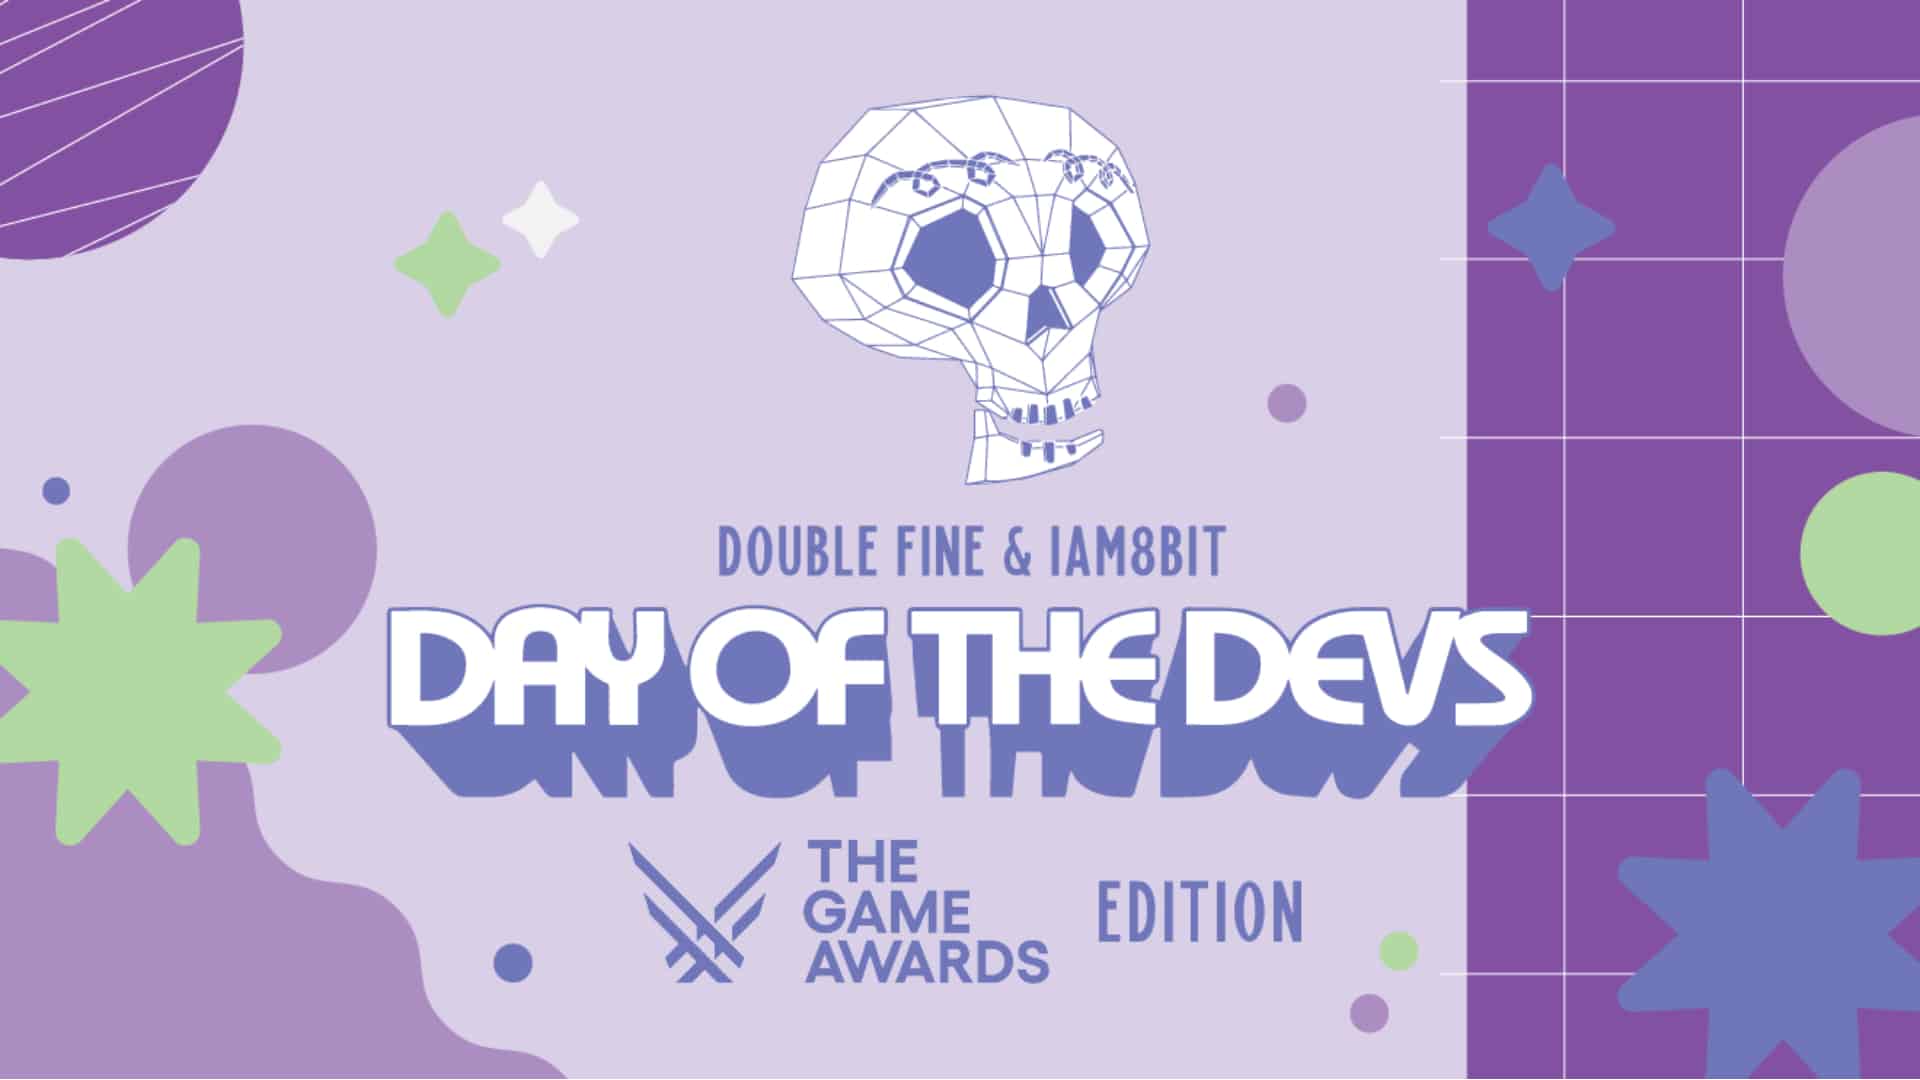 Day of the Devs The Game Awards